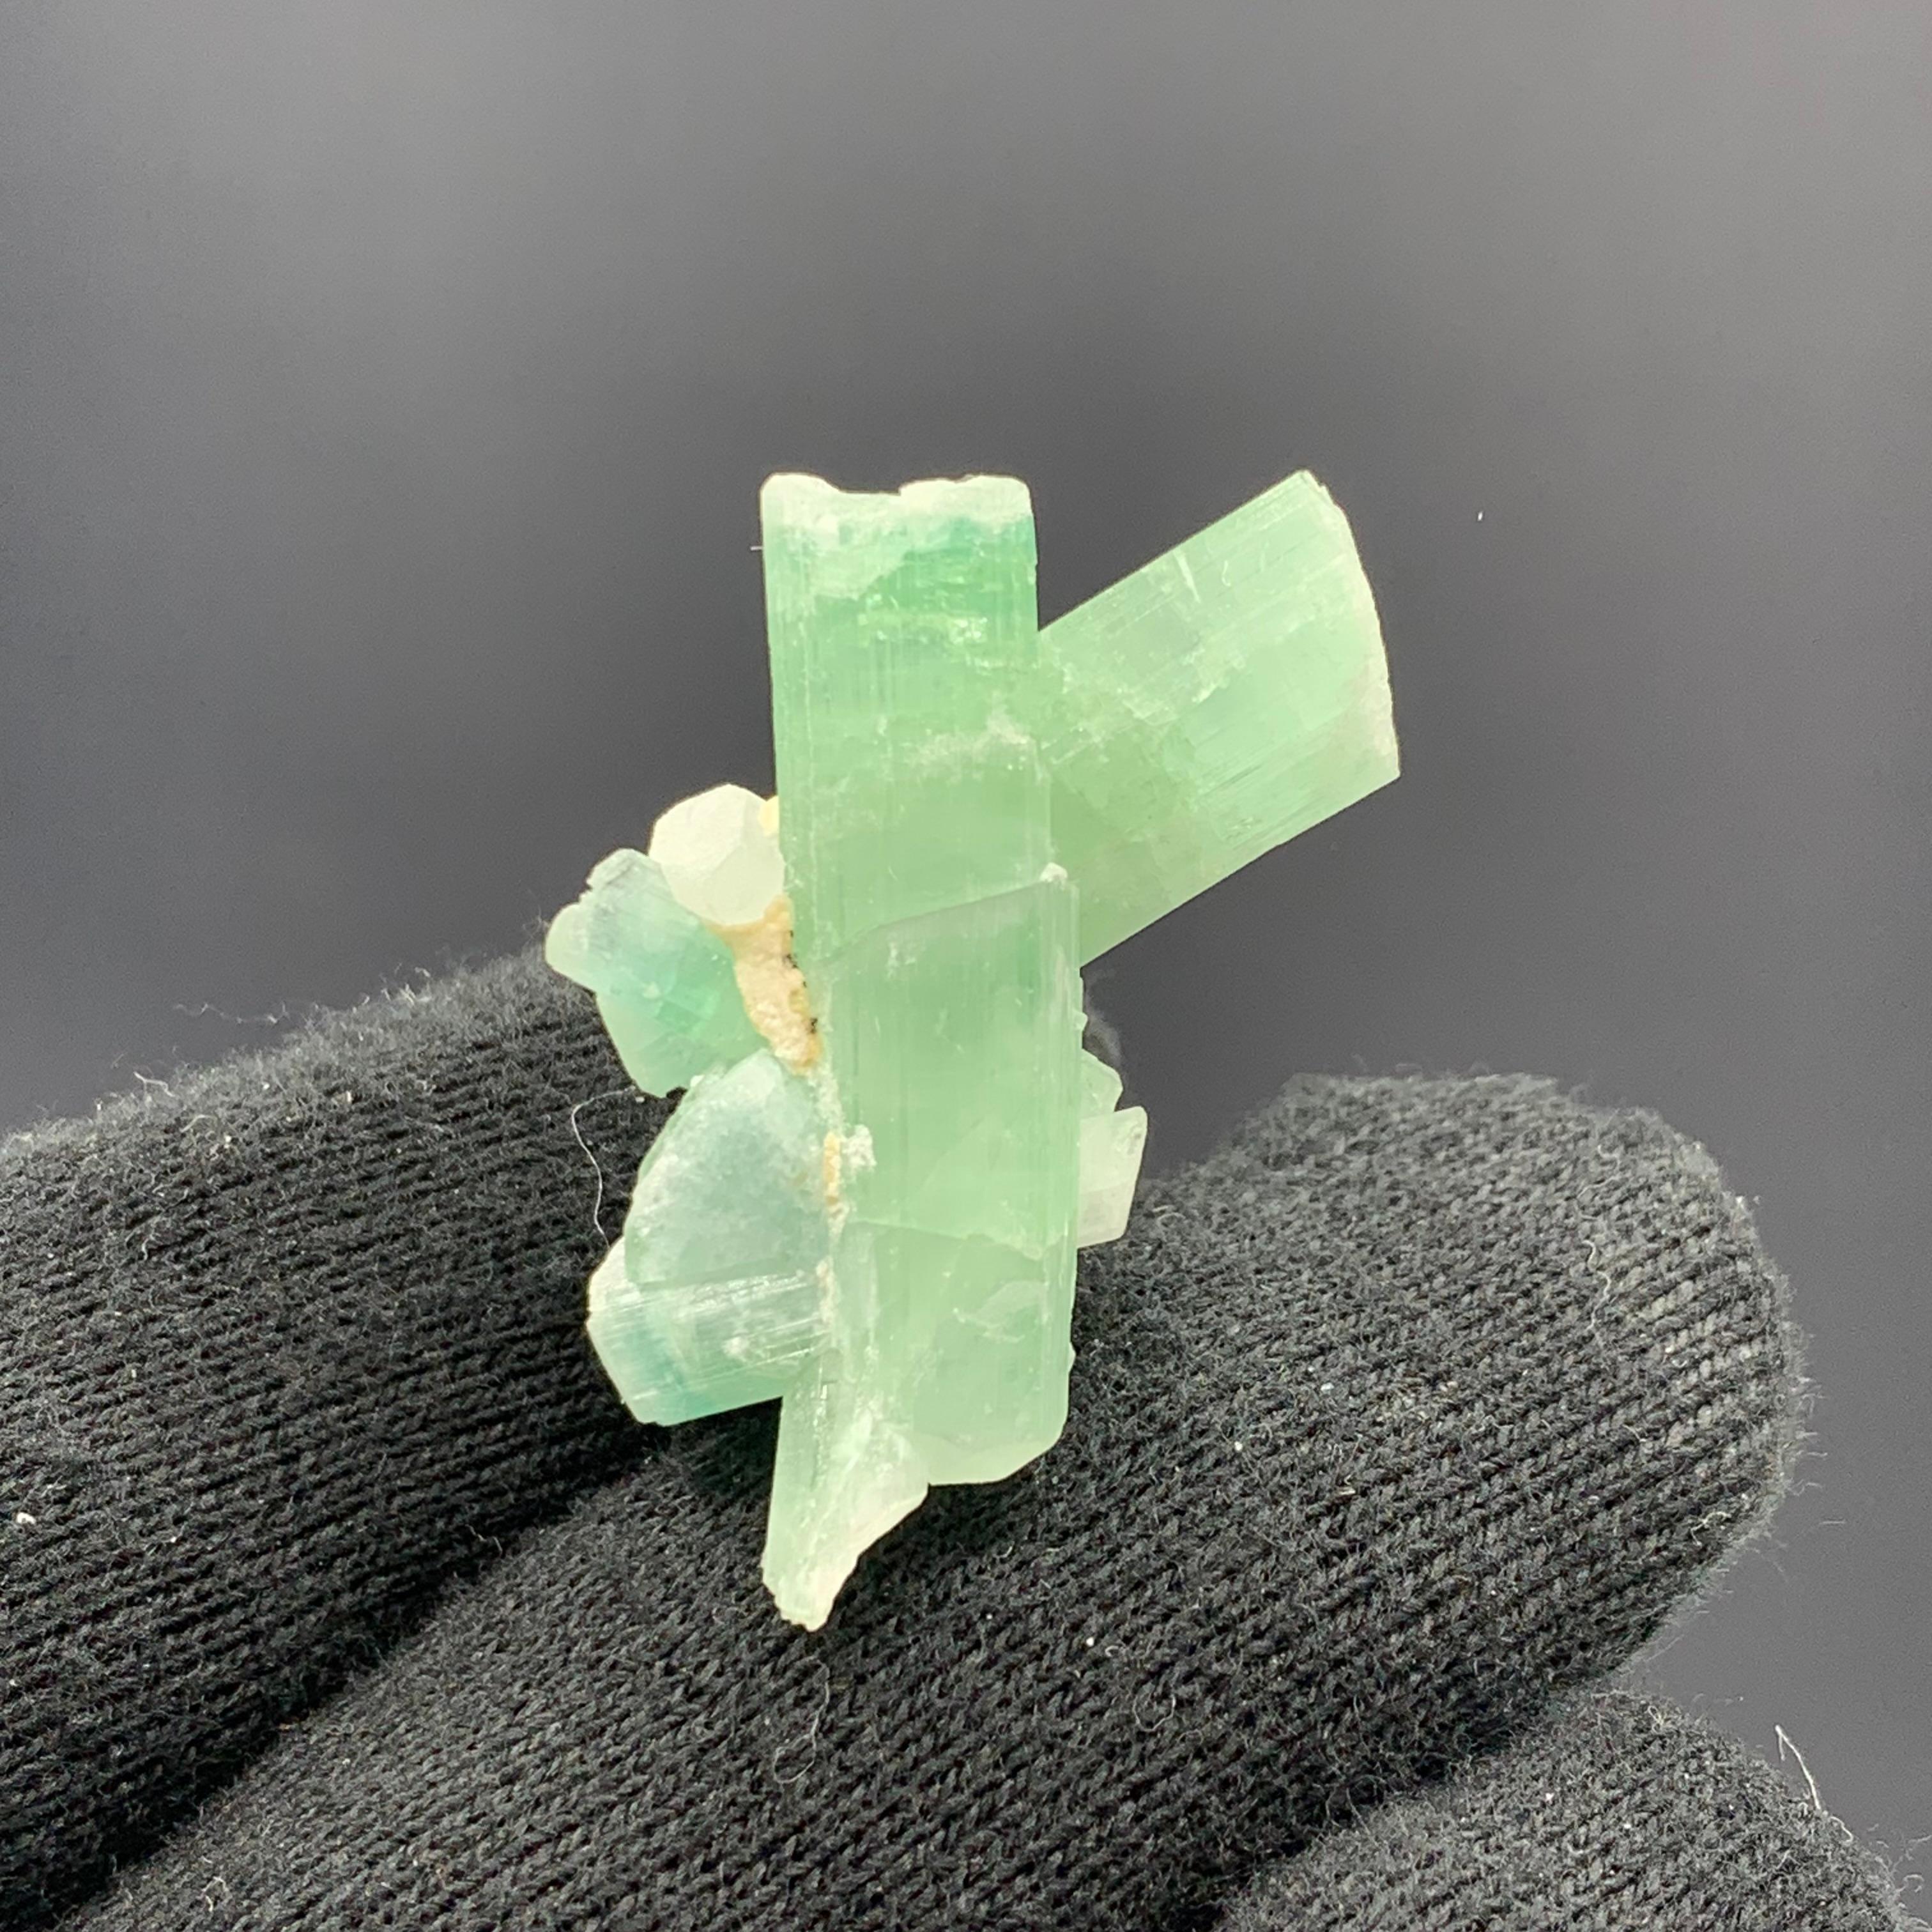 53.55 Cts Adorable Green Sea-foam Tourmaline Crystal Bunch From Afghanistan 

Weight: 53.55 Cts 
Dimension: 3.5 x 1.9 x 1.7 Cm 
Origin: Kunar, Afghanistan 

Tourmaline is a crystalline silicate mineral group in which boron is compounded with